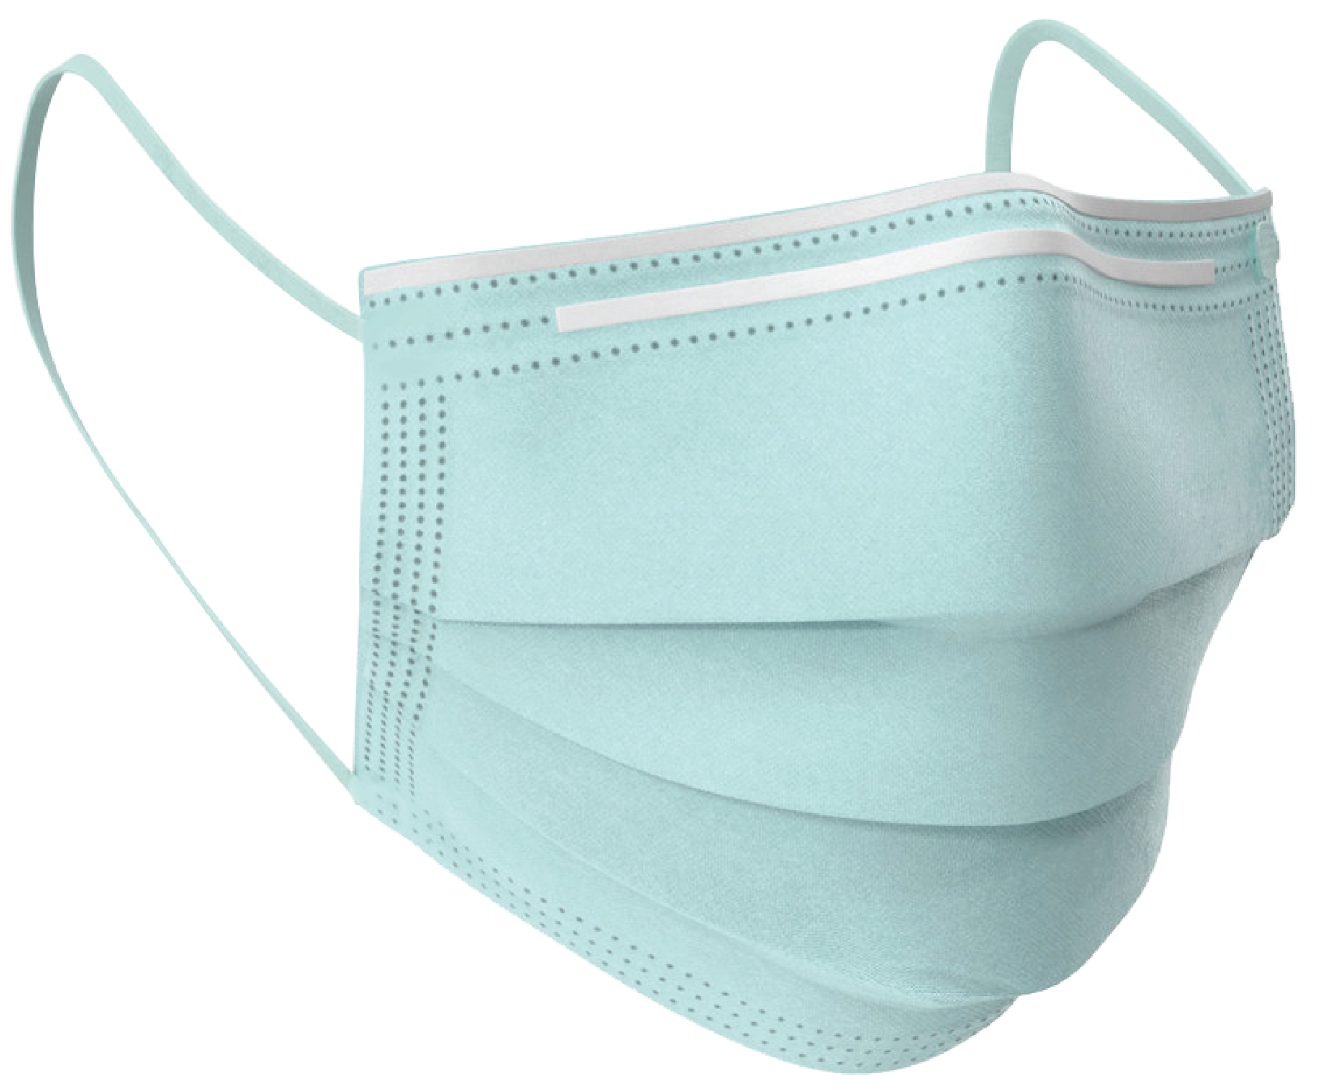 MEDICAL SURGICAL MASK | Orientworks